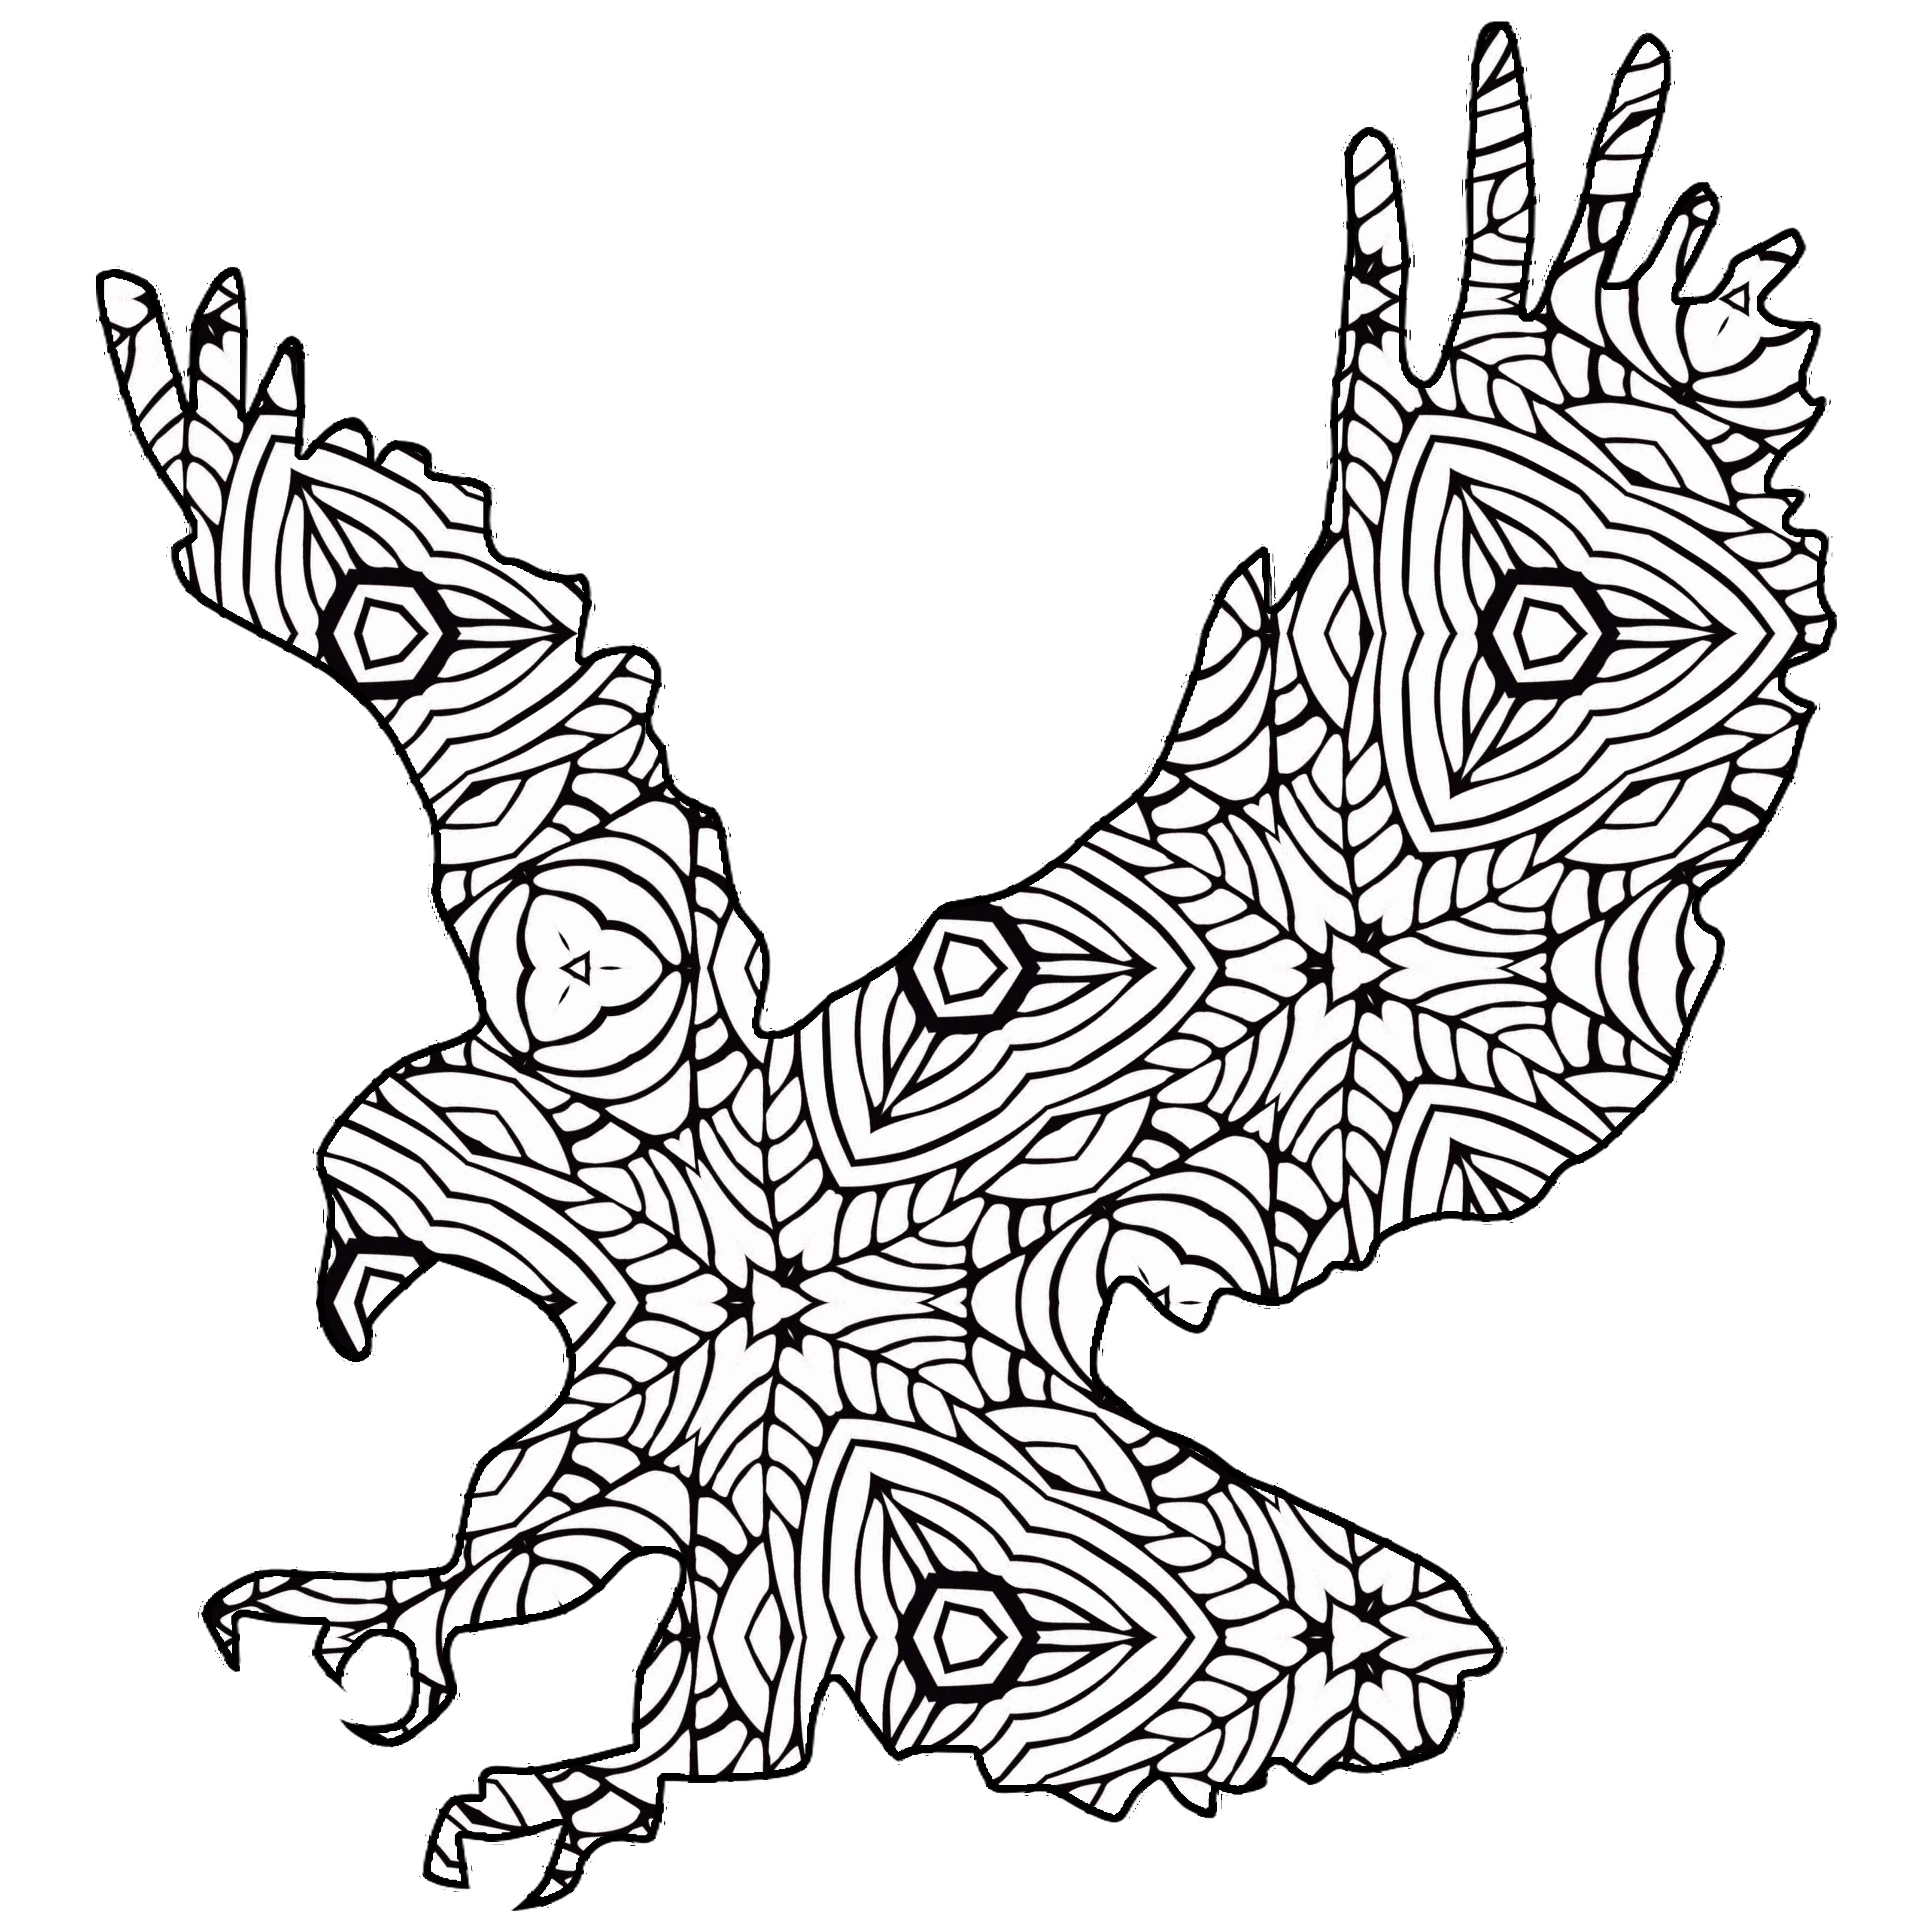 view-printable-free-animal-coloring-pages-background-colorist